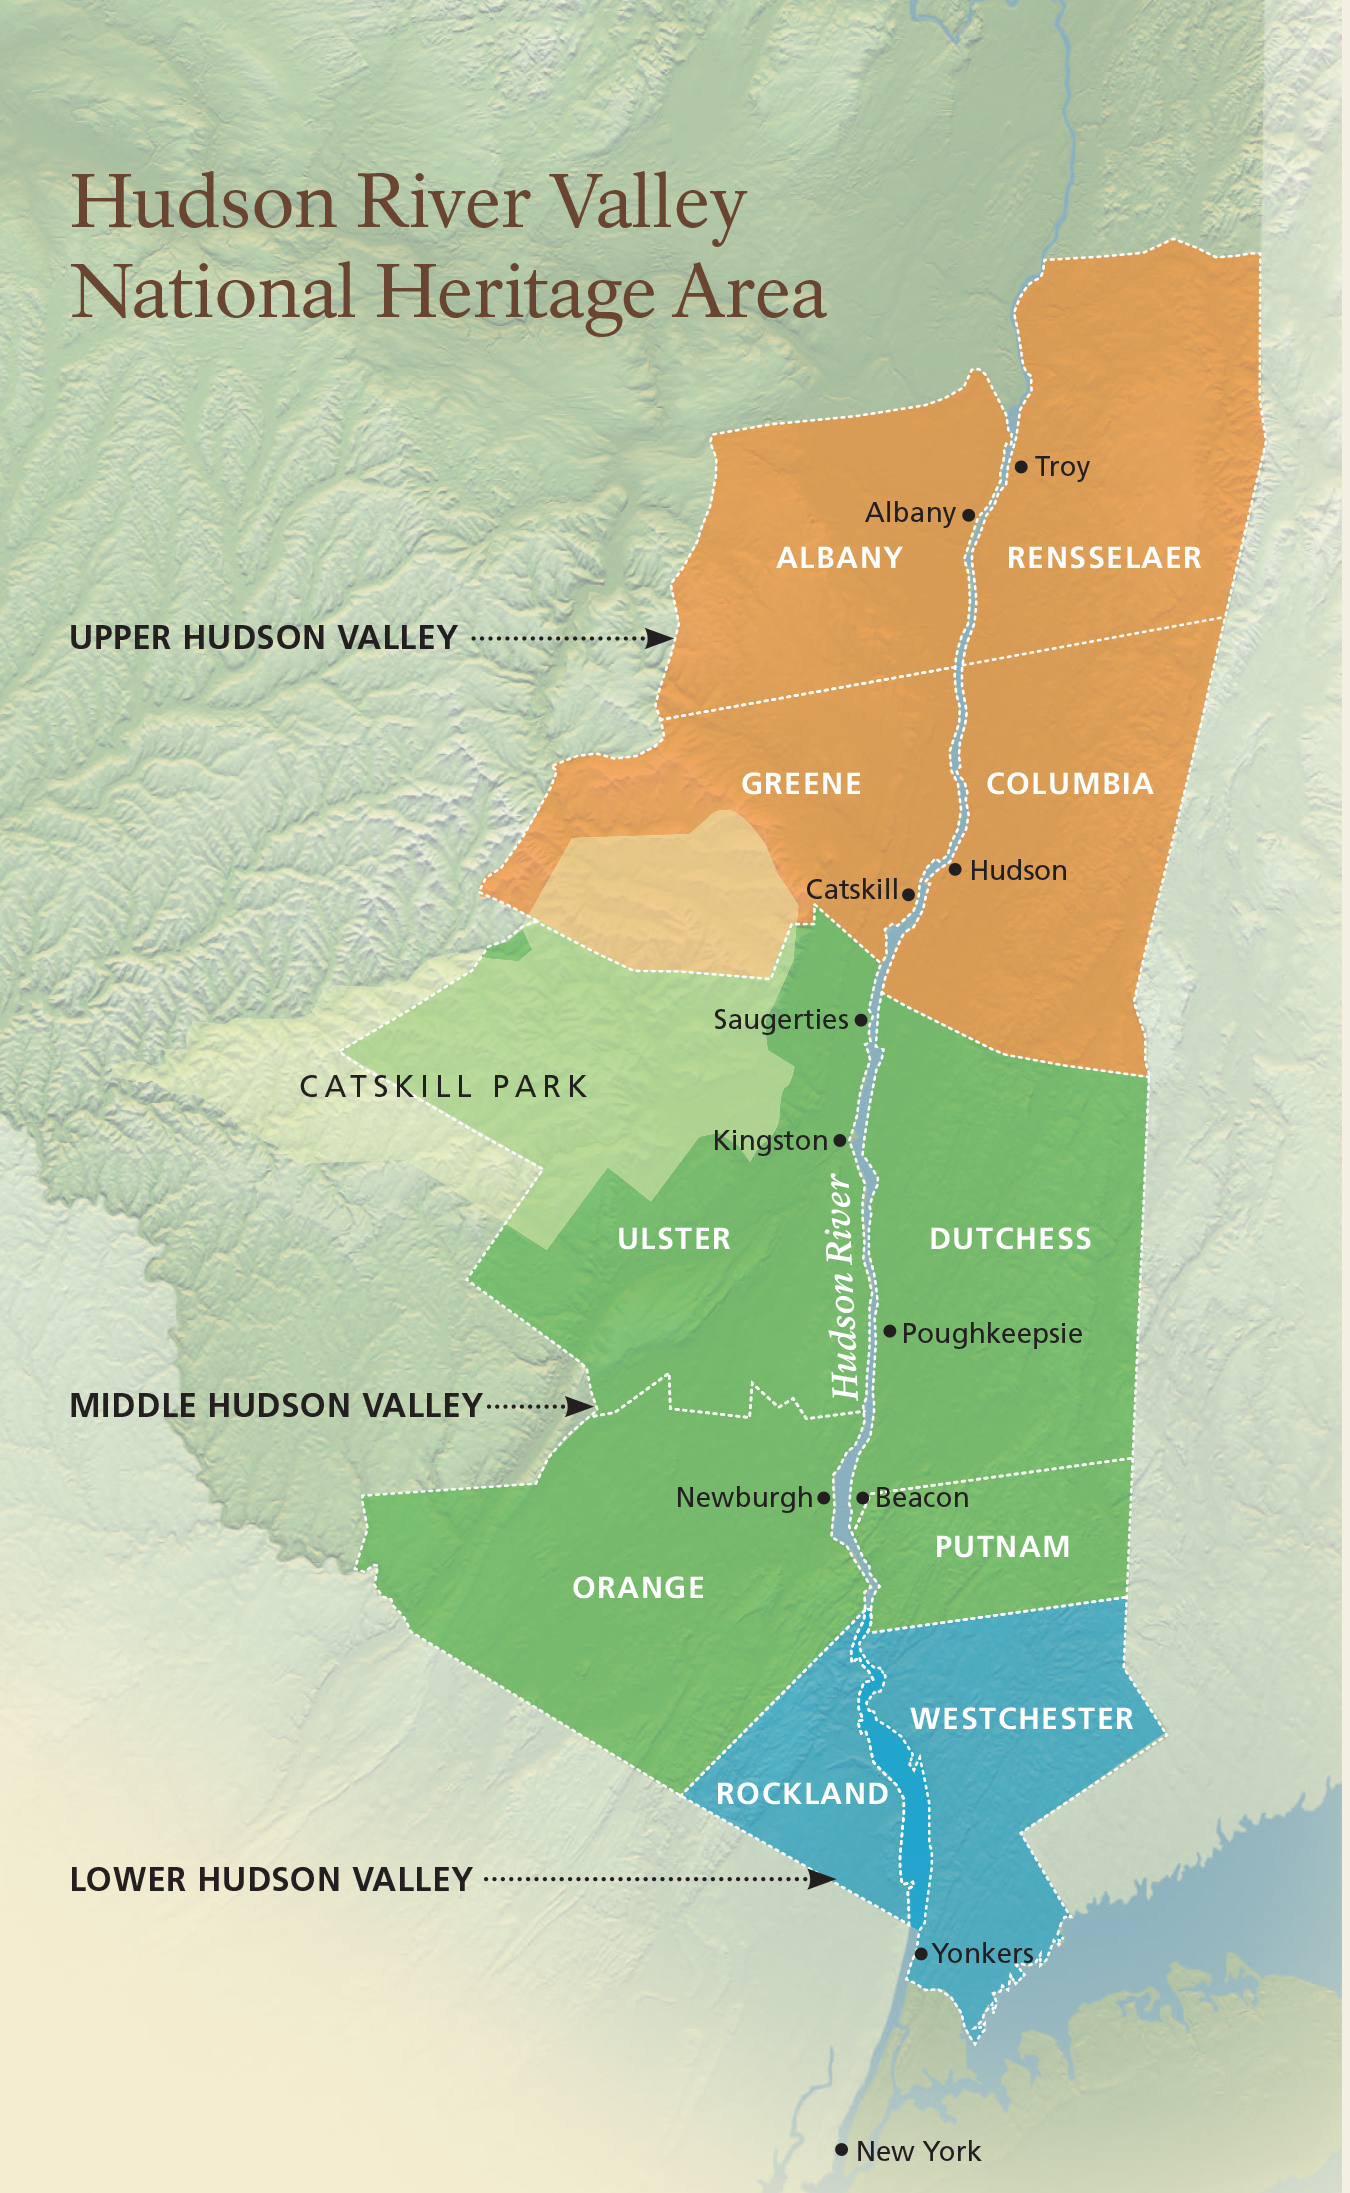 map of hudson valley ny Hudson River Valley Regions Hudson River Valley National Heritage Area map of hudson valley ny